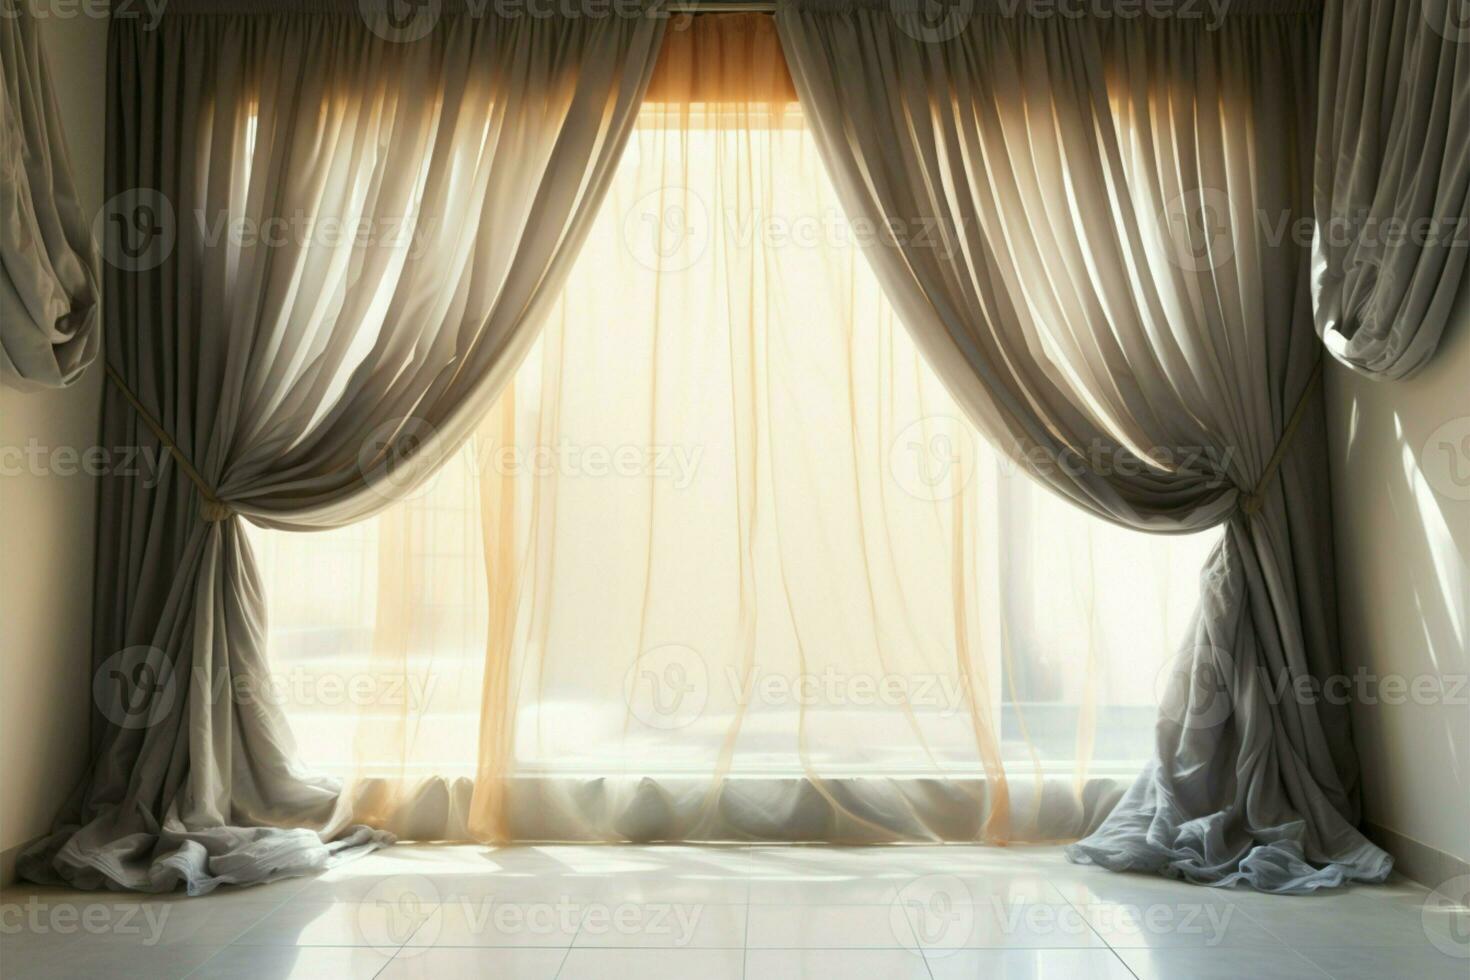 A curtain dances with the sunlight, casting a tranquil atmosphere AI Generated photo